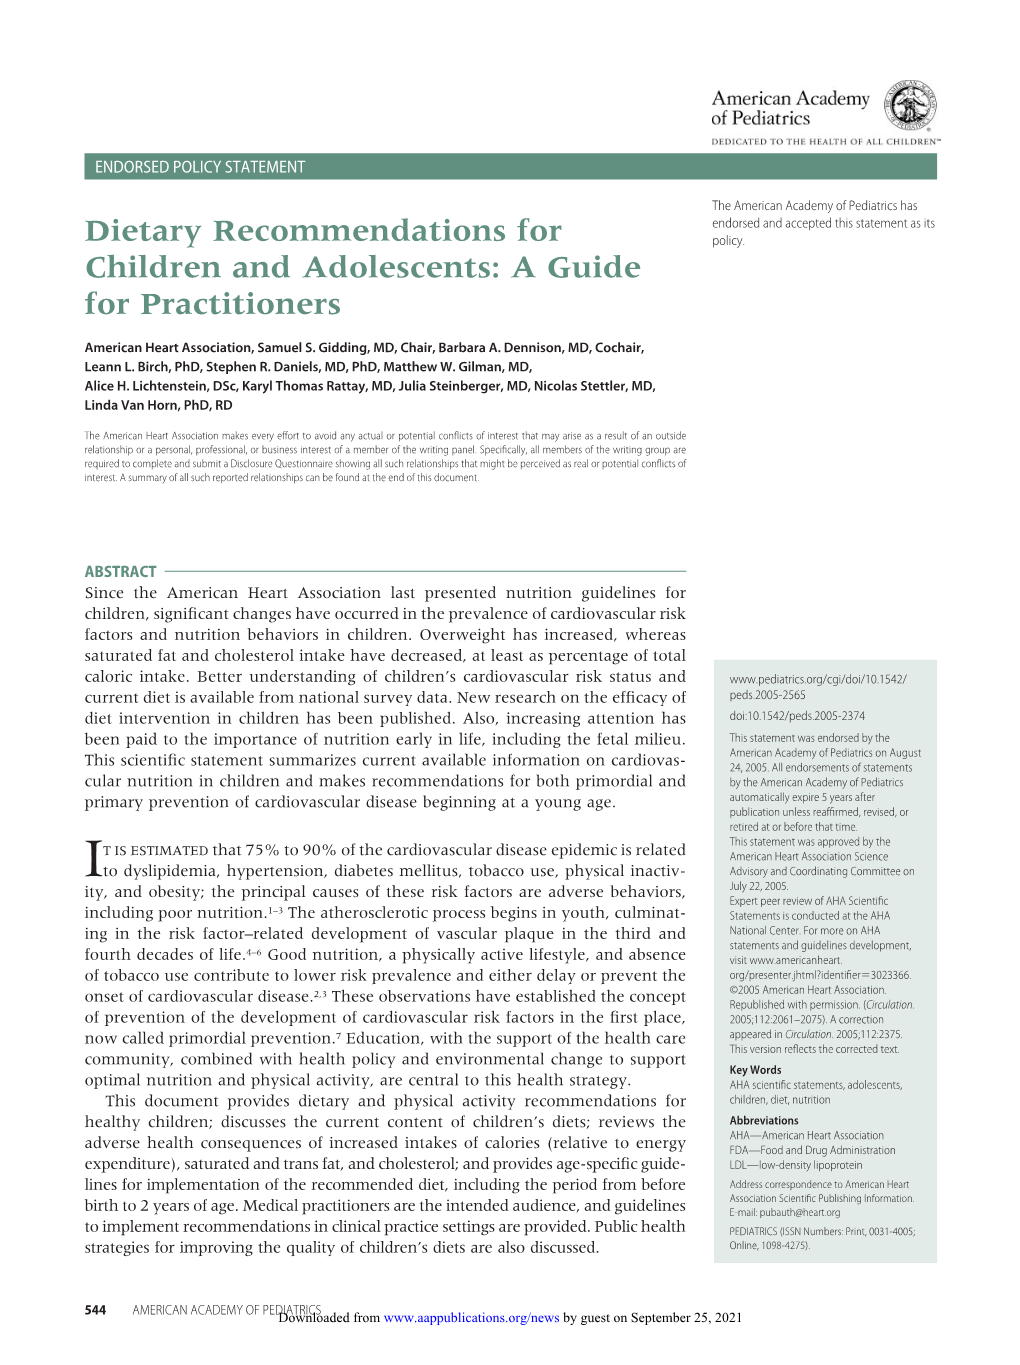 Dietary Recommendations for Children and Adolescents: a Guide for Practitioners Samuel S